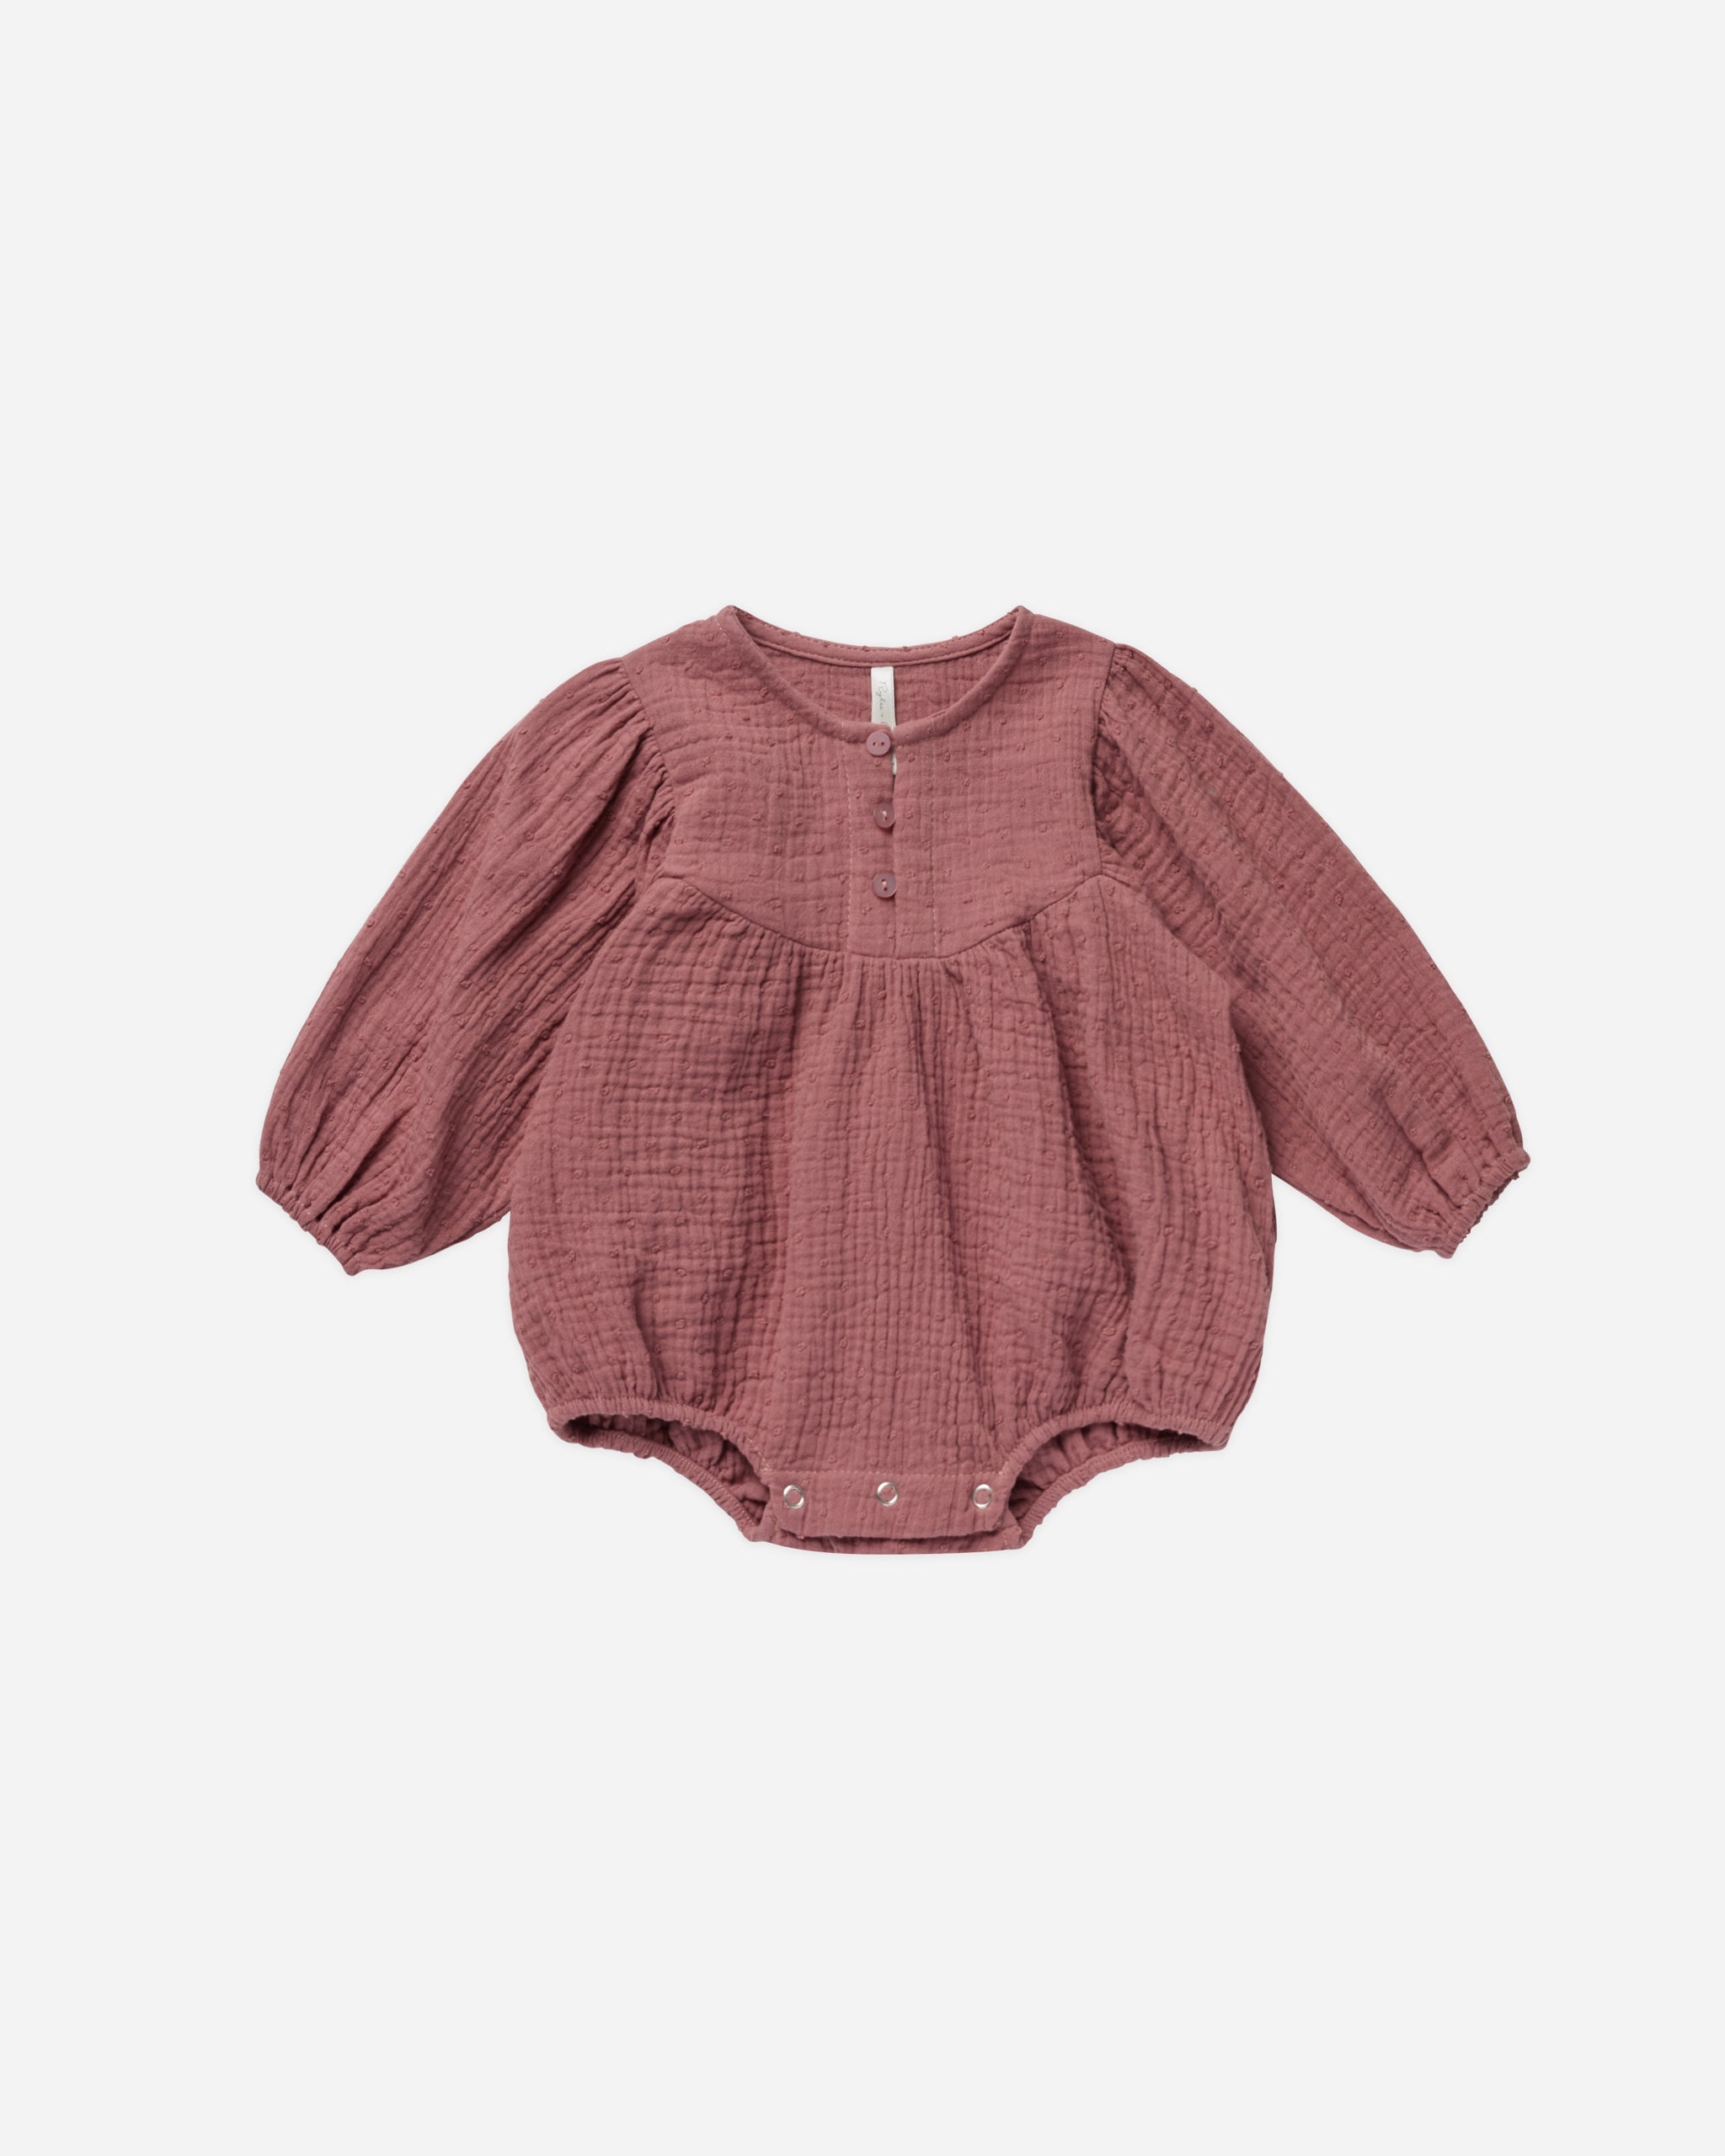 Gwen Romper || Raspberry - Rylee + Cru | Kids Clothes | Trendy Baby Clothes | Modern Infant Outfits |